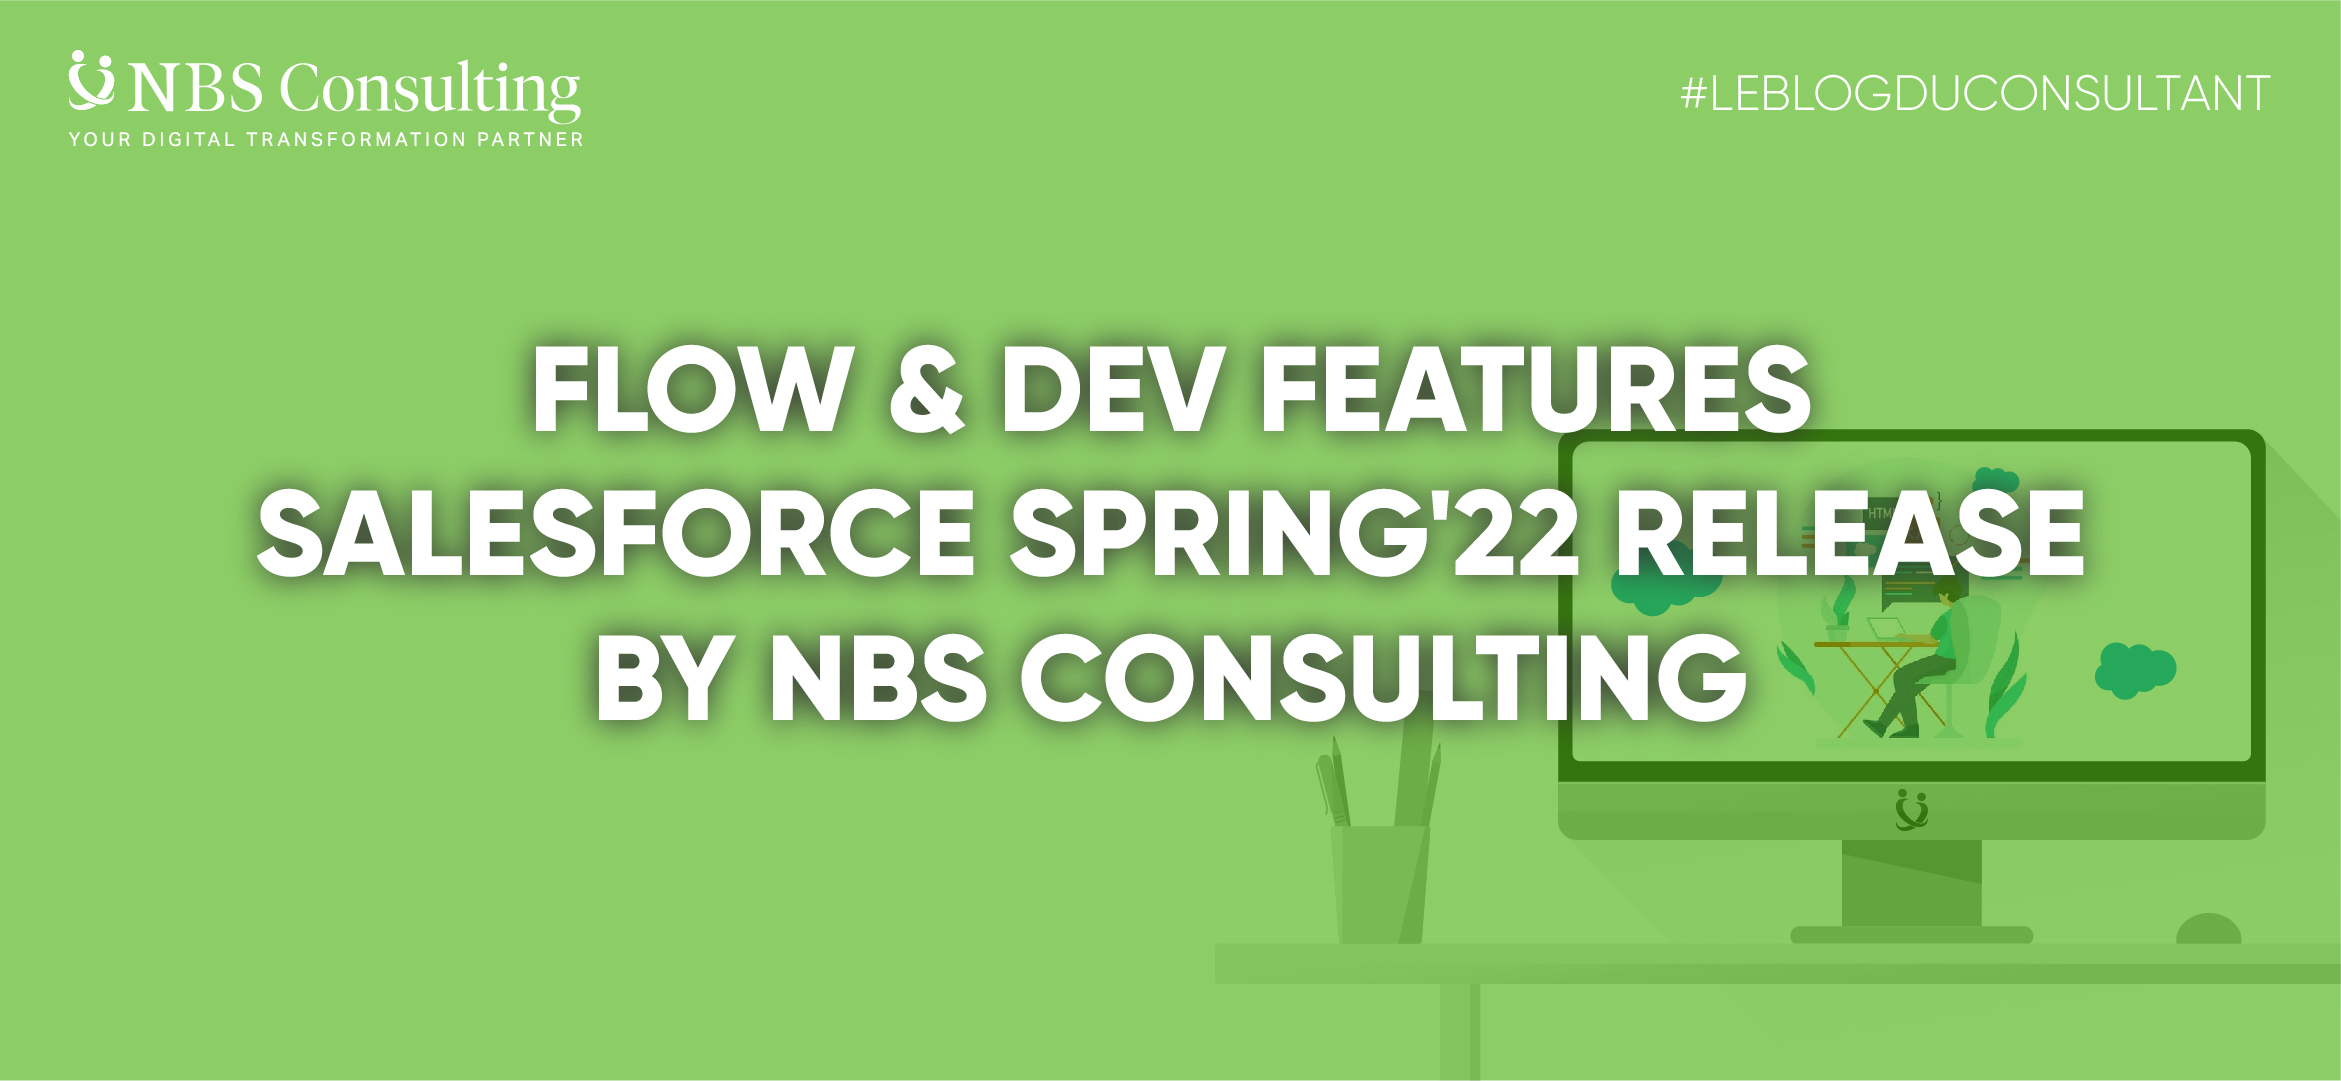 LE BLOG DU CONSULTANT : FLOW & DEV FEATURES SALESFORCE SPRING'22 RELEASE BY NBS Consulting